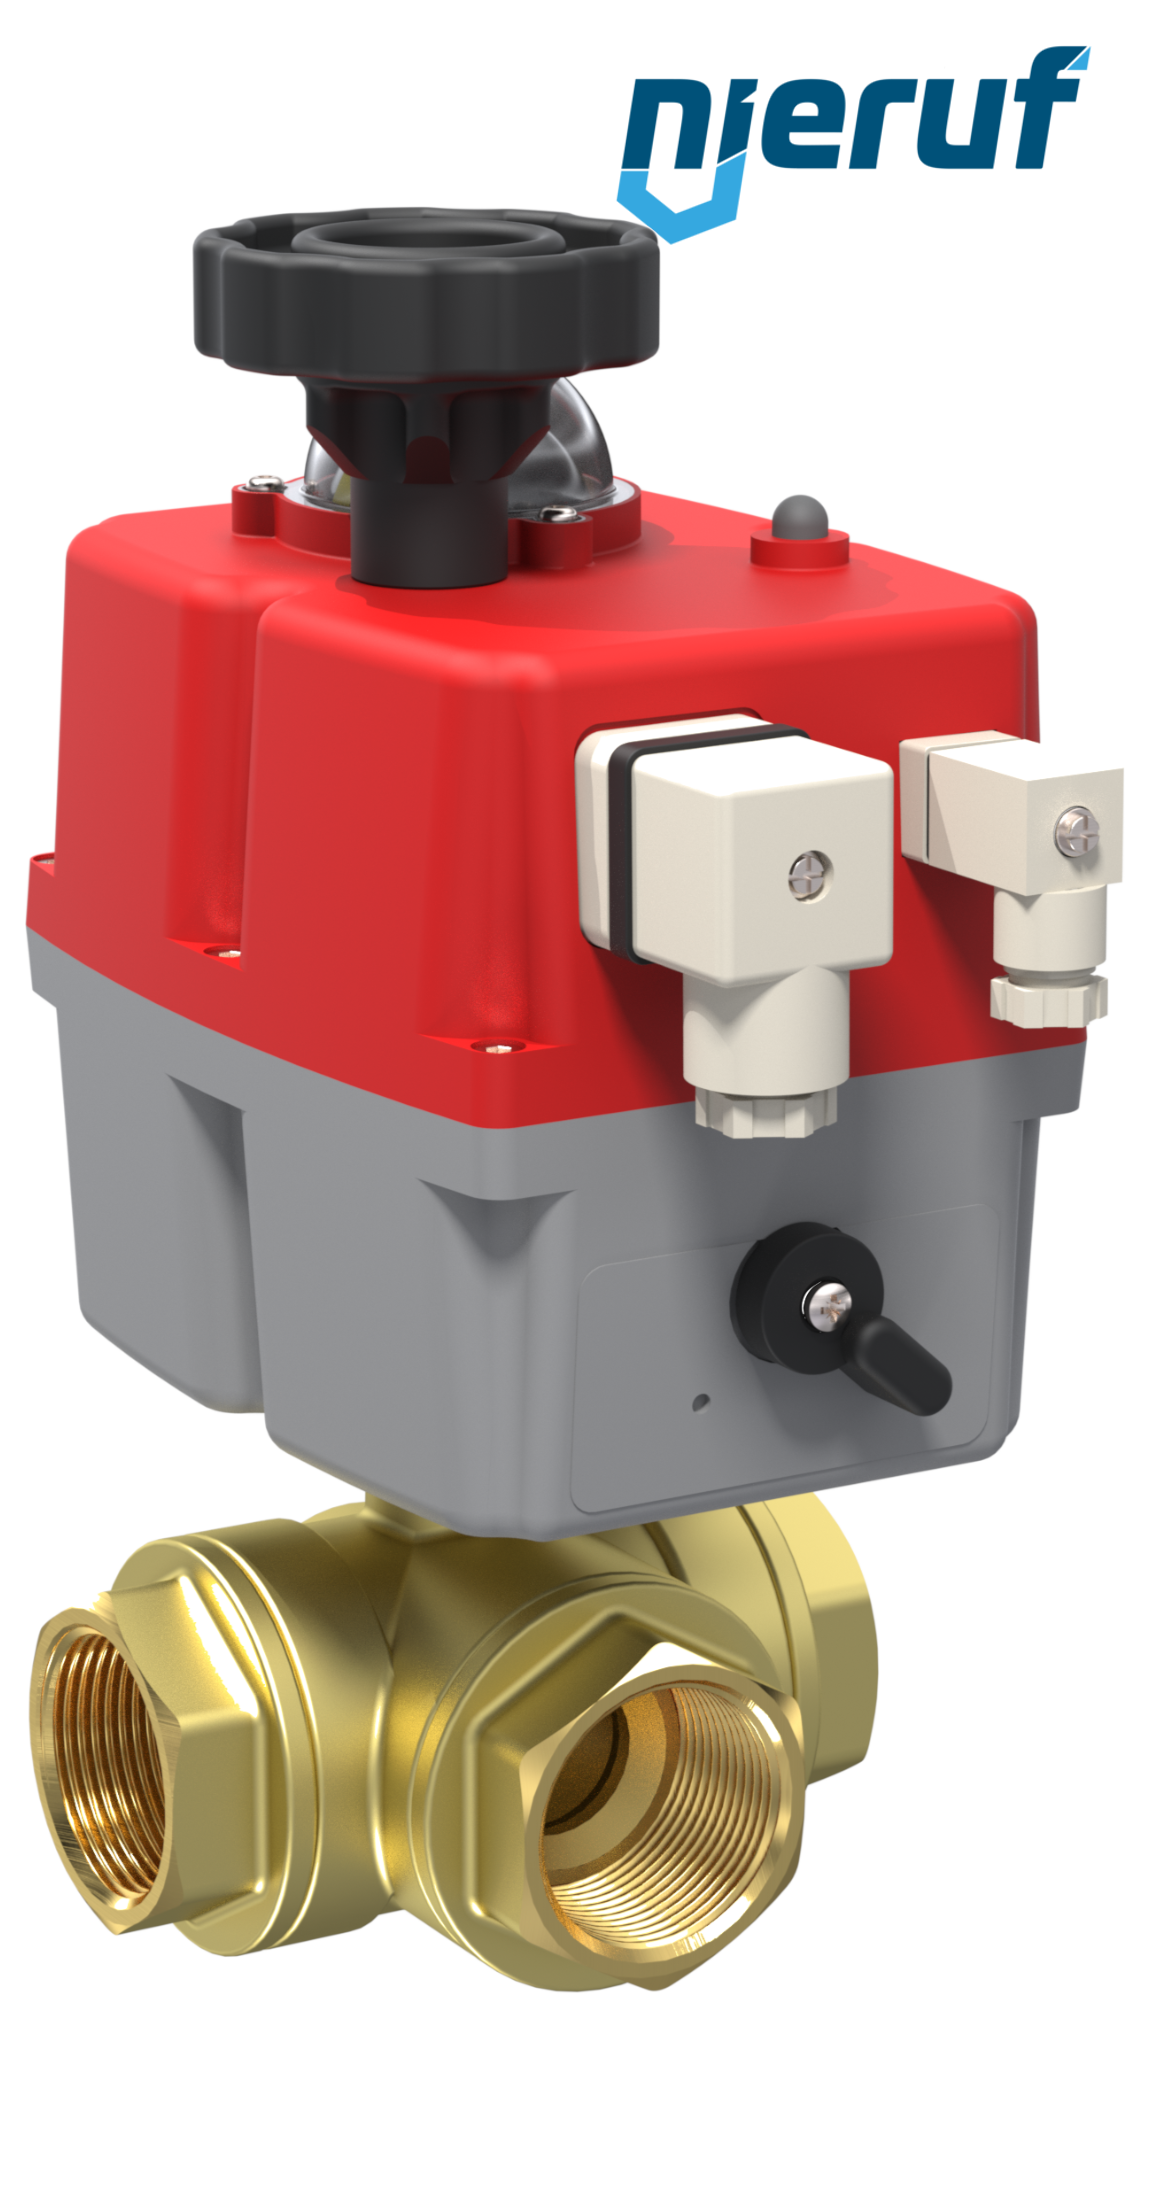 3 way automatic-ball valve 24-240V DN15 - 1/2" inch brass full port design with L drilling